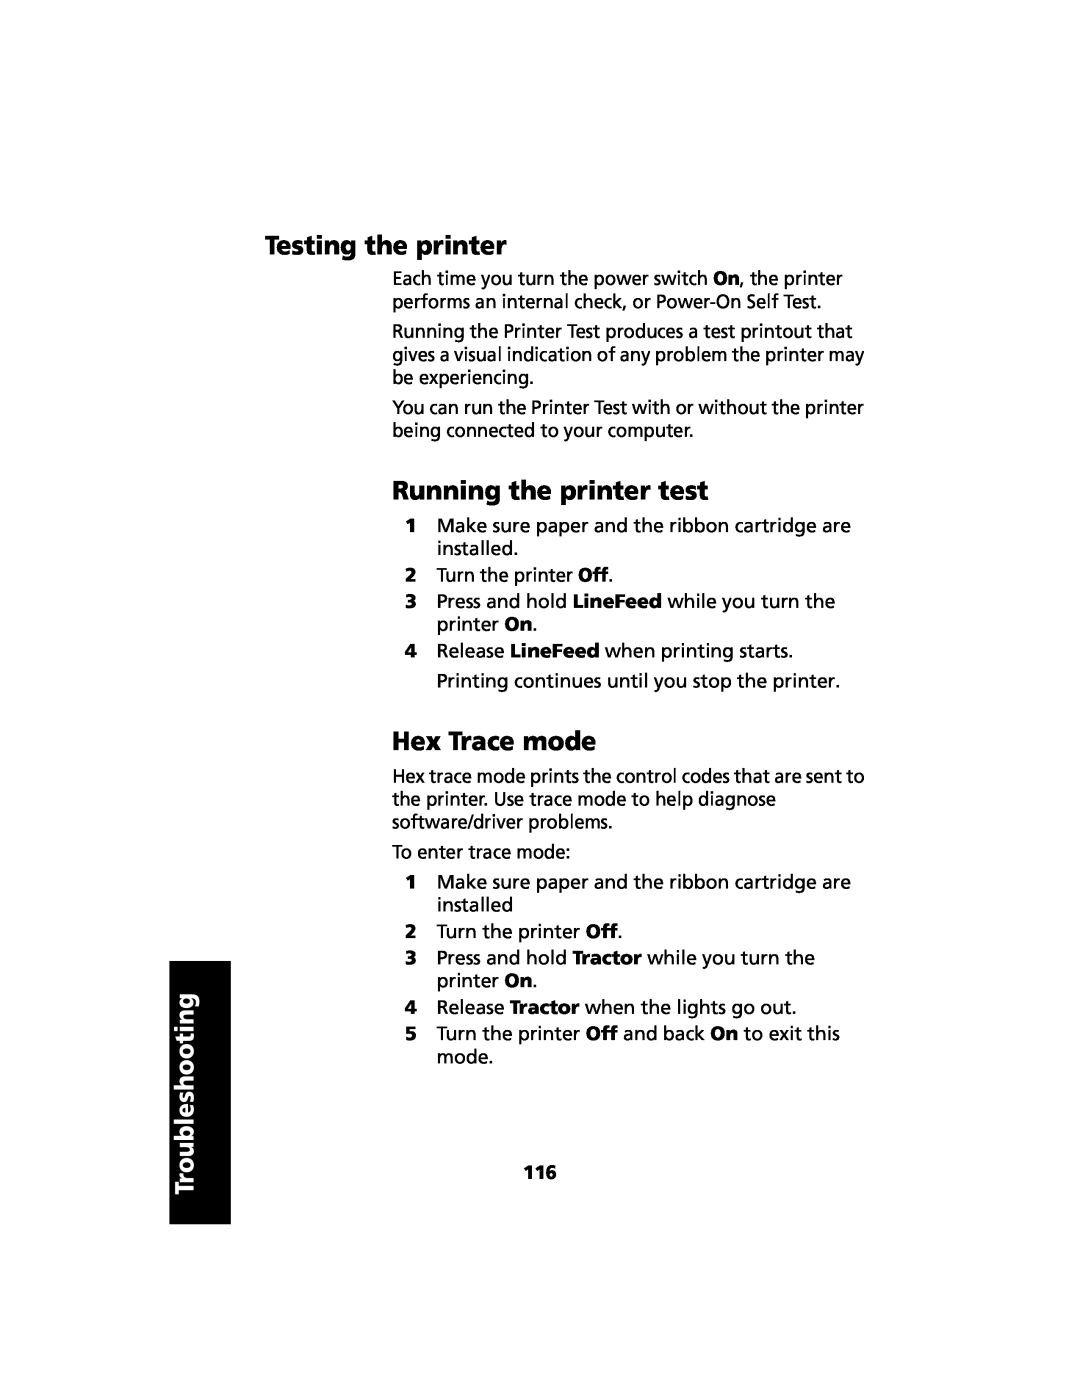 Lexmark 2480 manual Testing the printer, Running the printer test, Hex Trace mode, Troubleshooting 